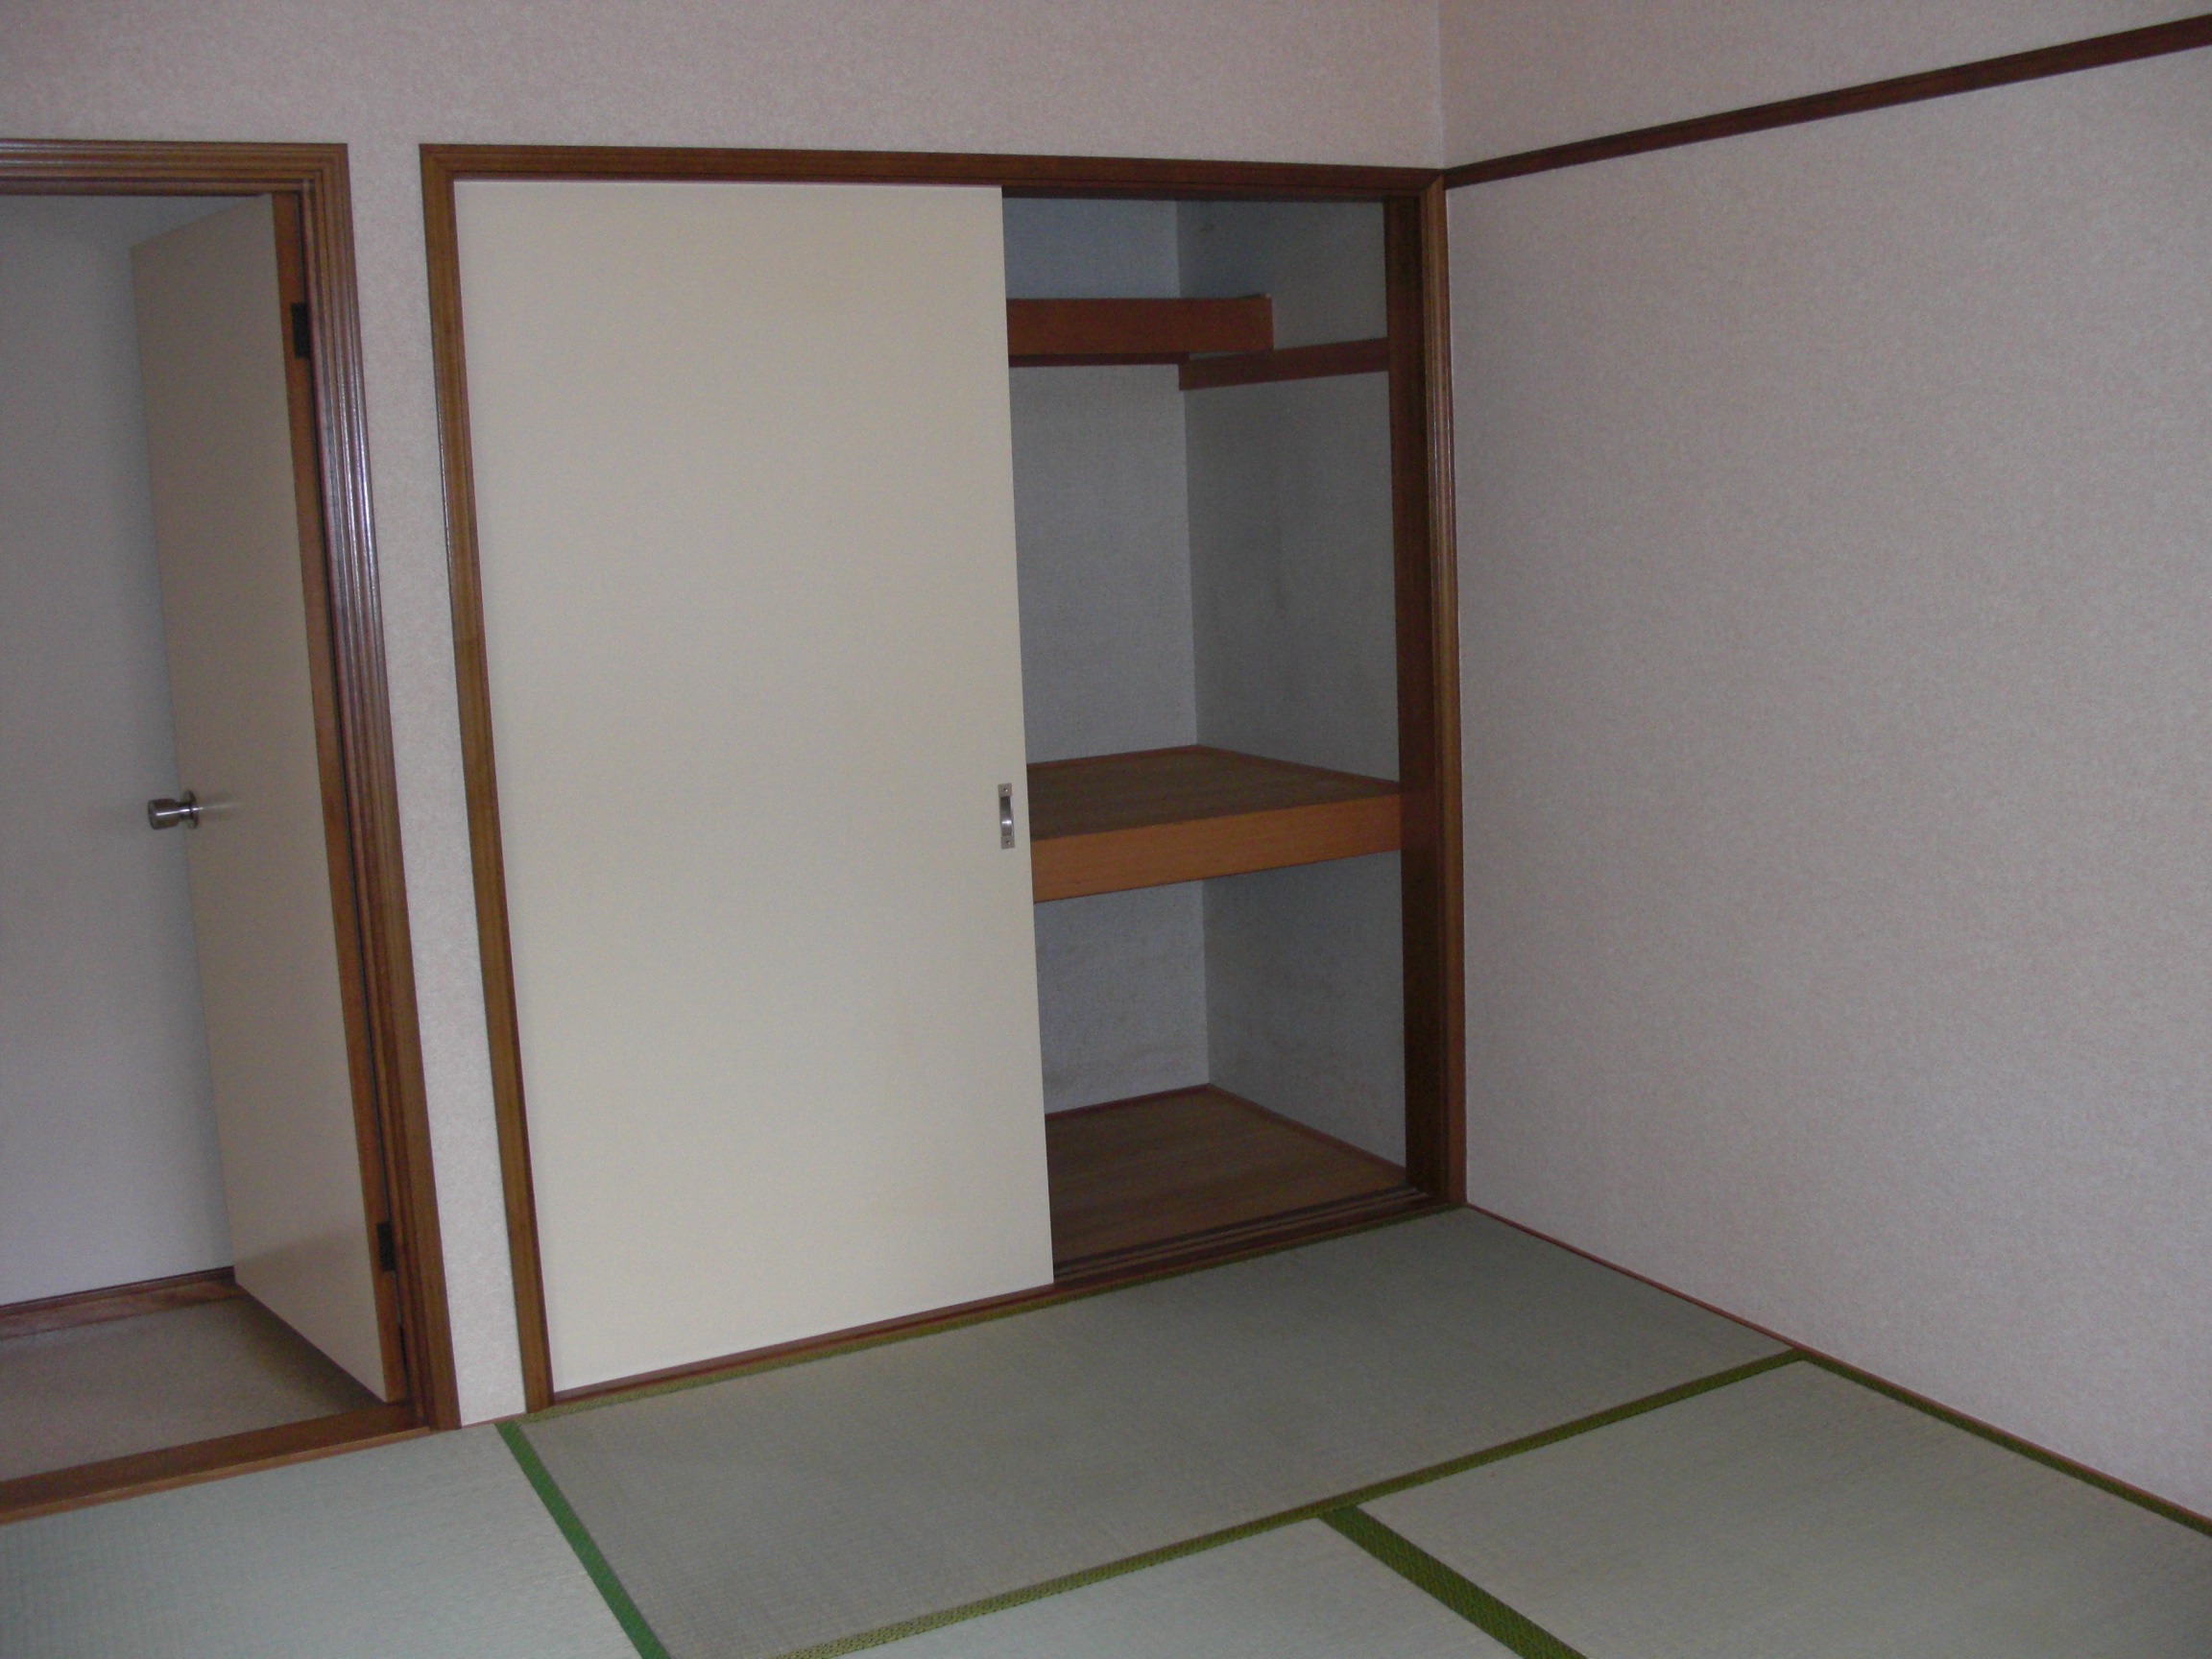 Receipt. There is closet storage of Japanese-style room